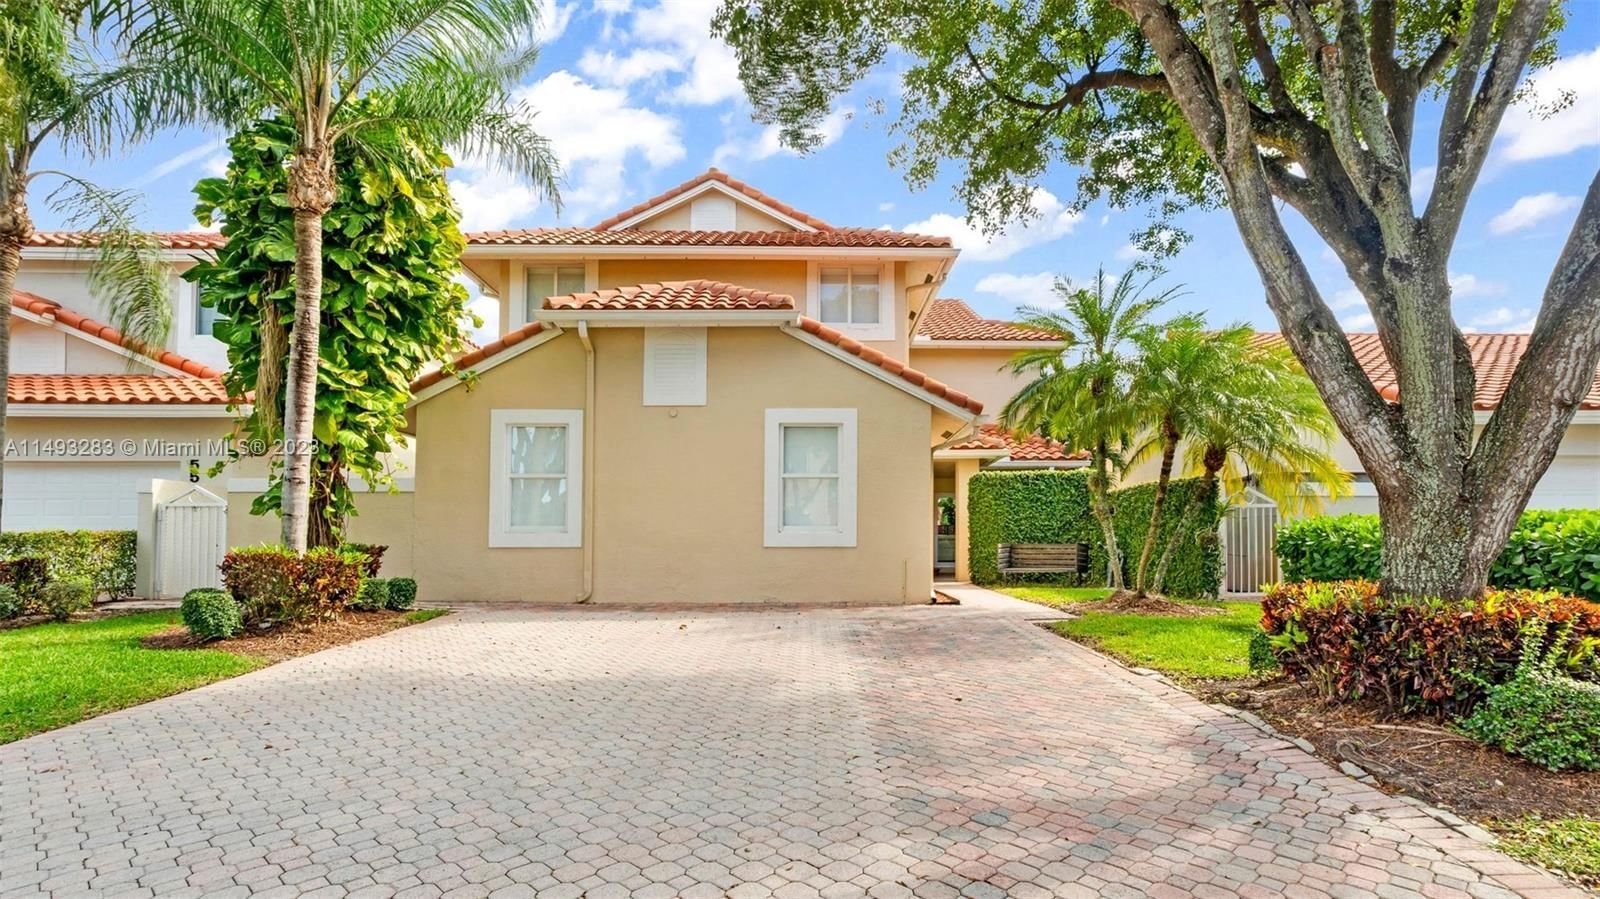 Real estate property located at 5497 105 CT, Miami-Dade County, Doral Sands, Doral, FL